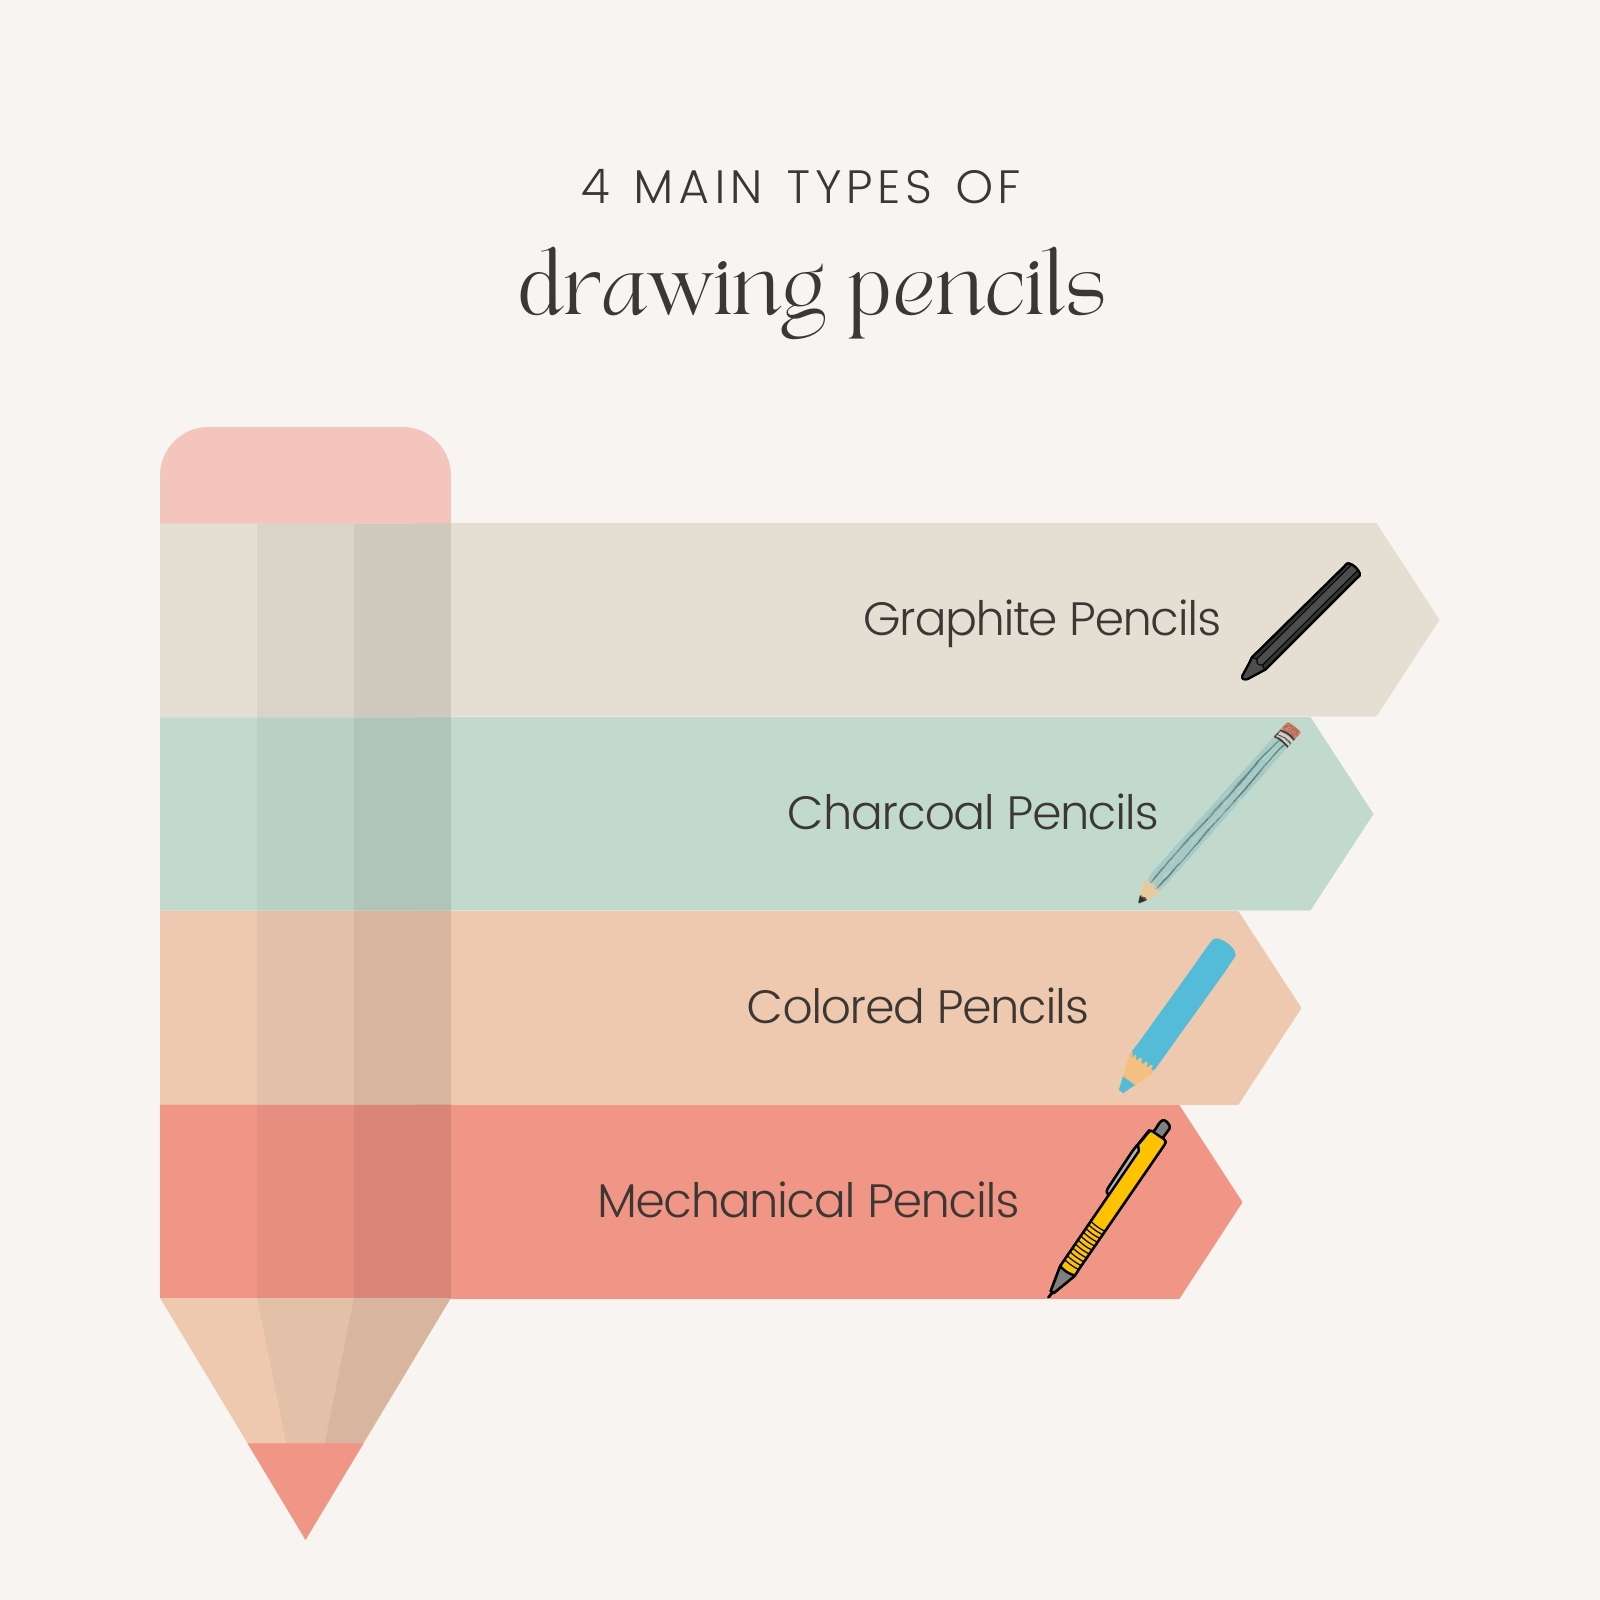 4 main types of drawing pencils